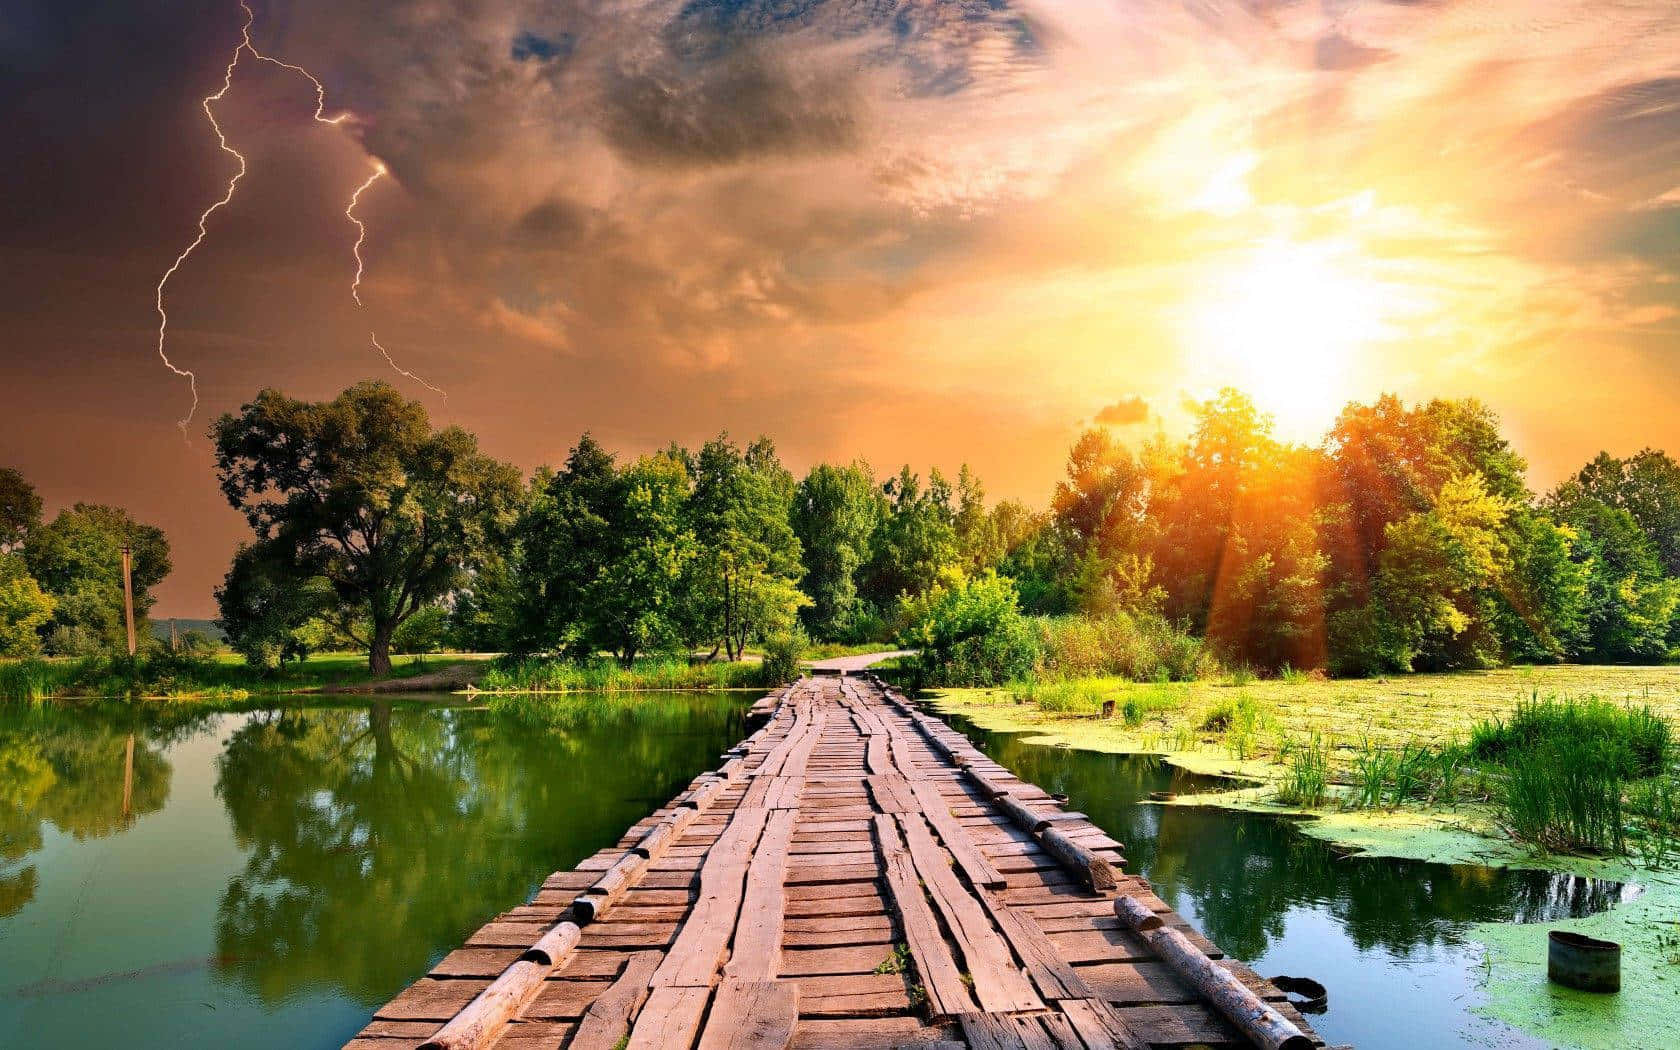 A Wooden Bridge Over A Lake With Lightning